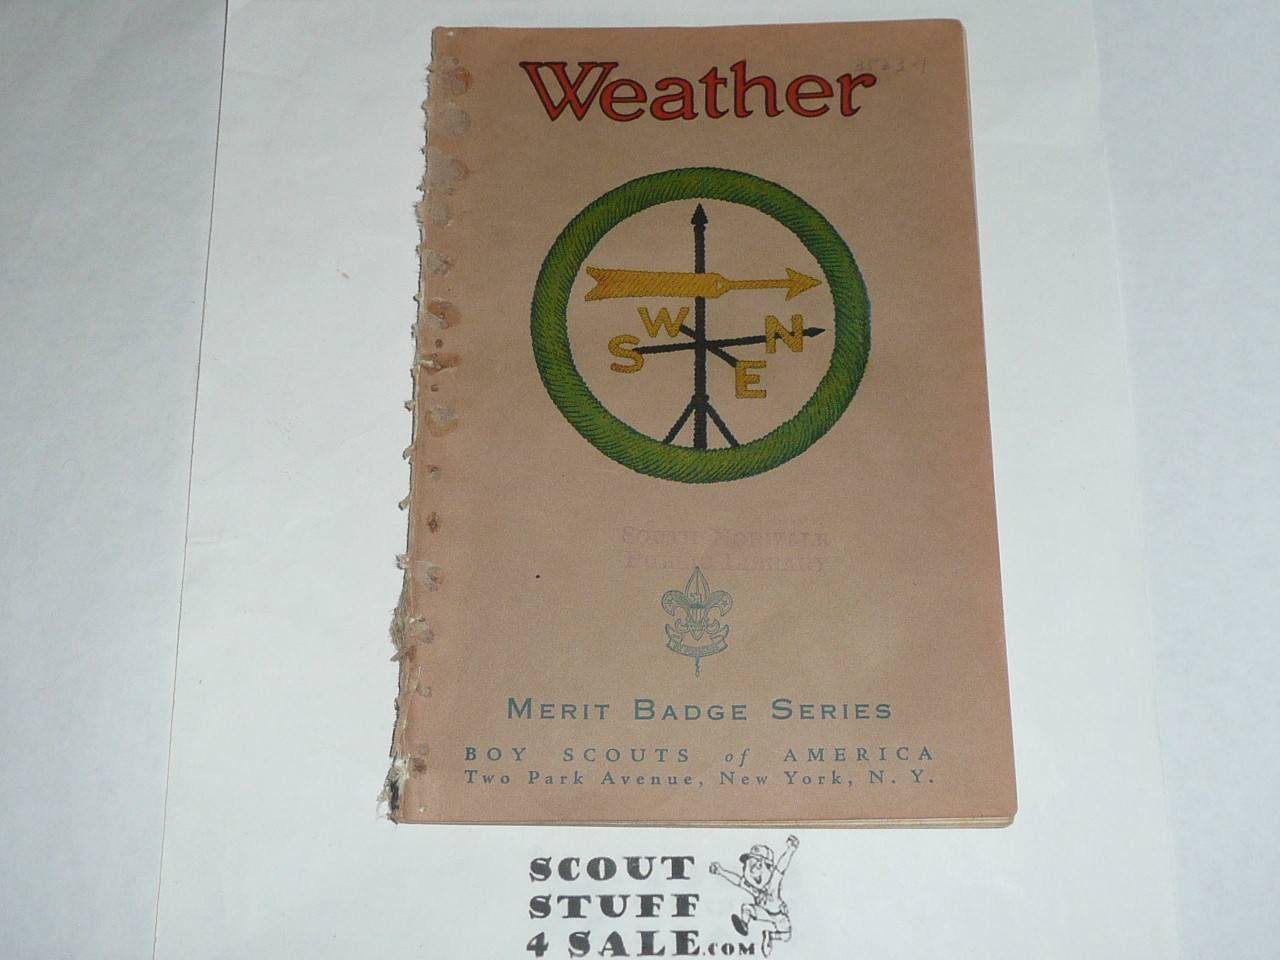 Weather Merit Badge Pamphlet, Type 3, Tan Cover, 2-40 Printing, some spine wear from library binding but book is solid